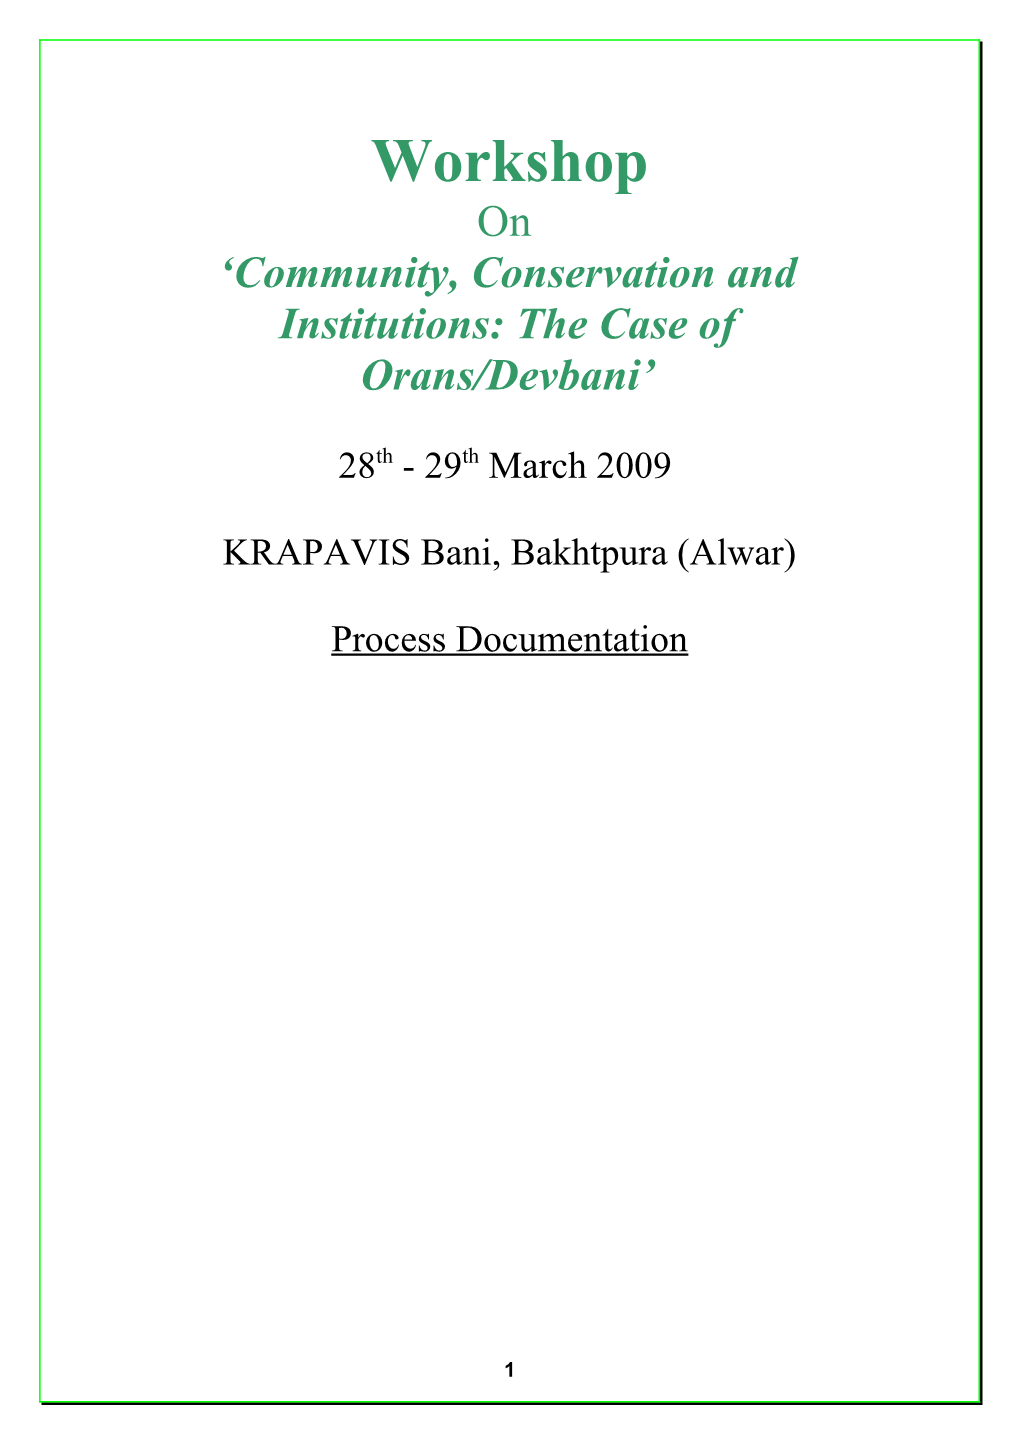 Community, Conservation and Institutions: the Case of Orans/Devbani